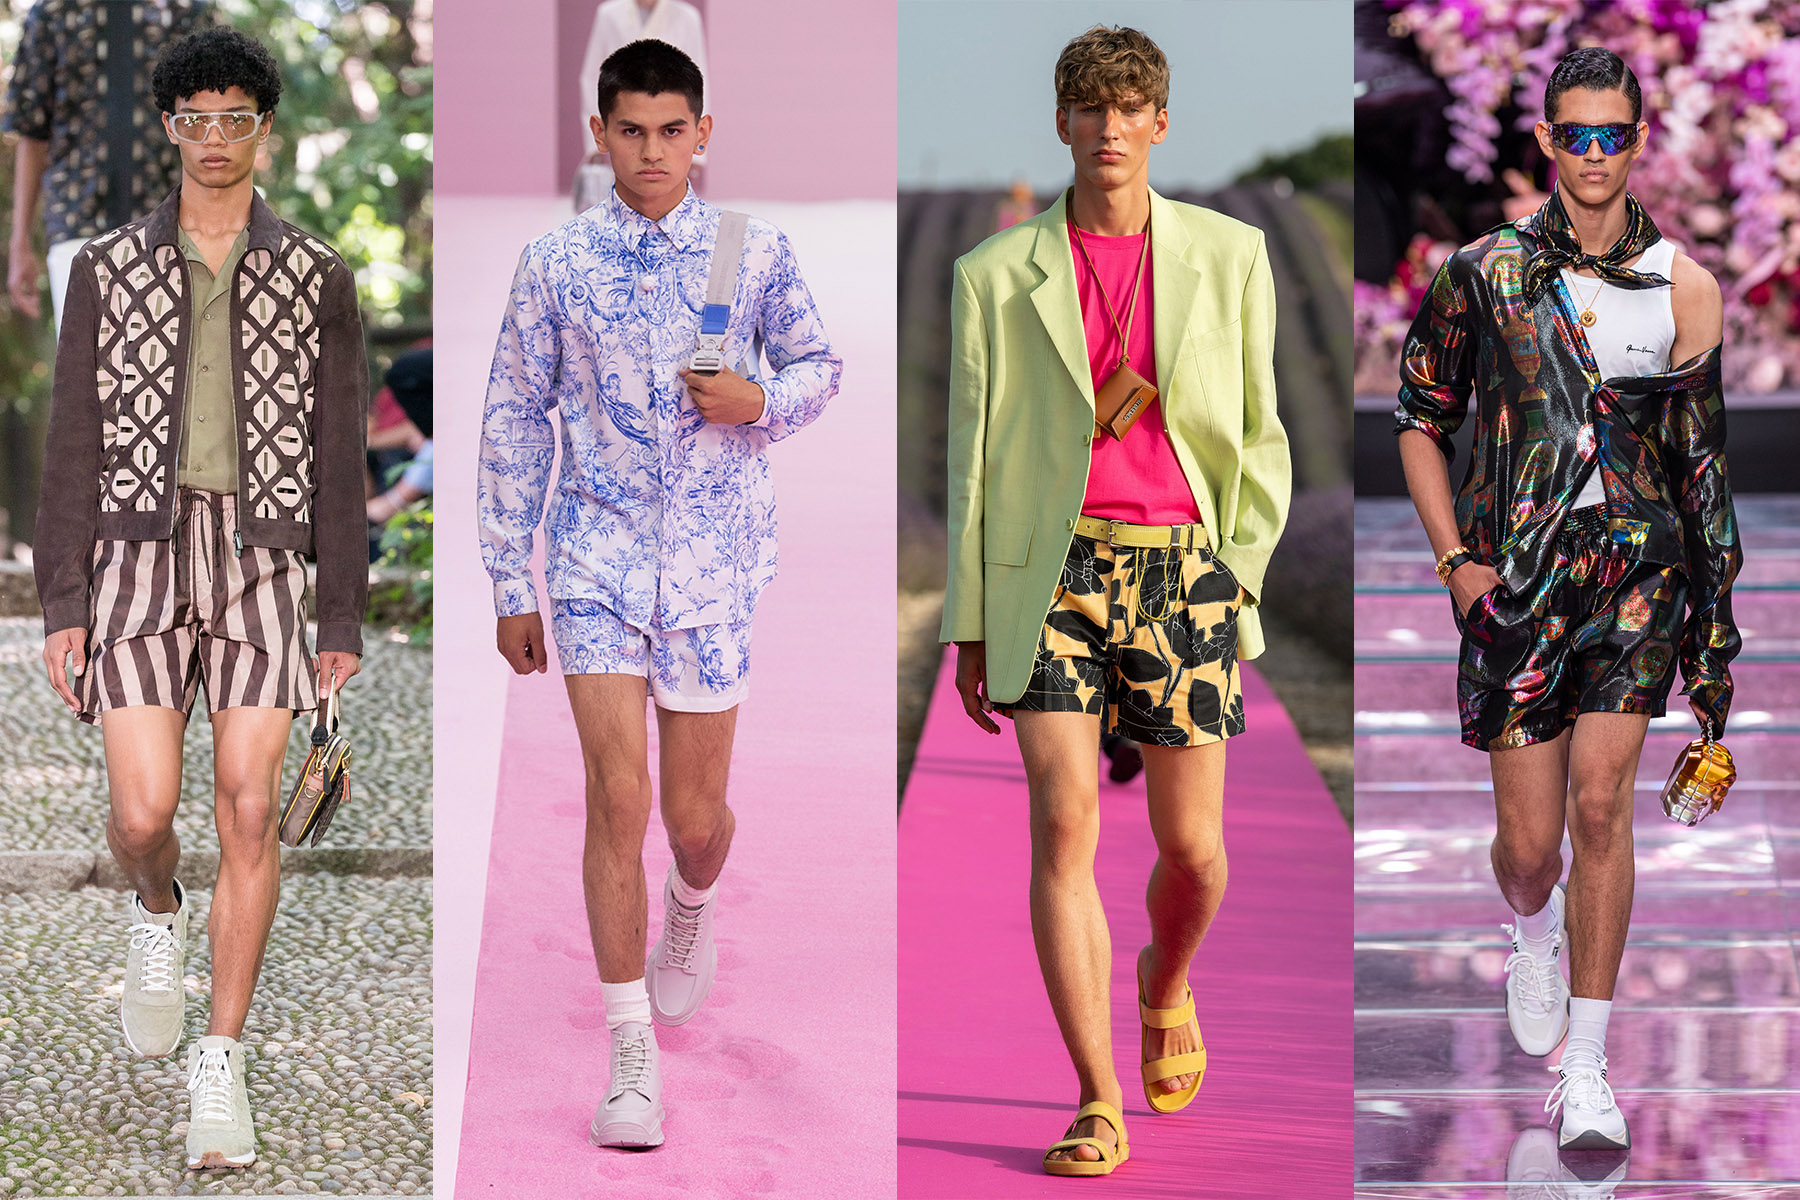 Forget denims, boxer shorts are the hottest menswear trend this summer